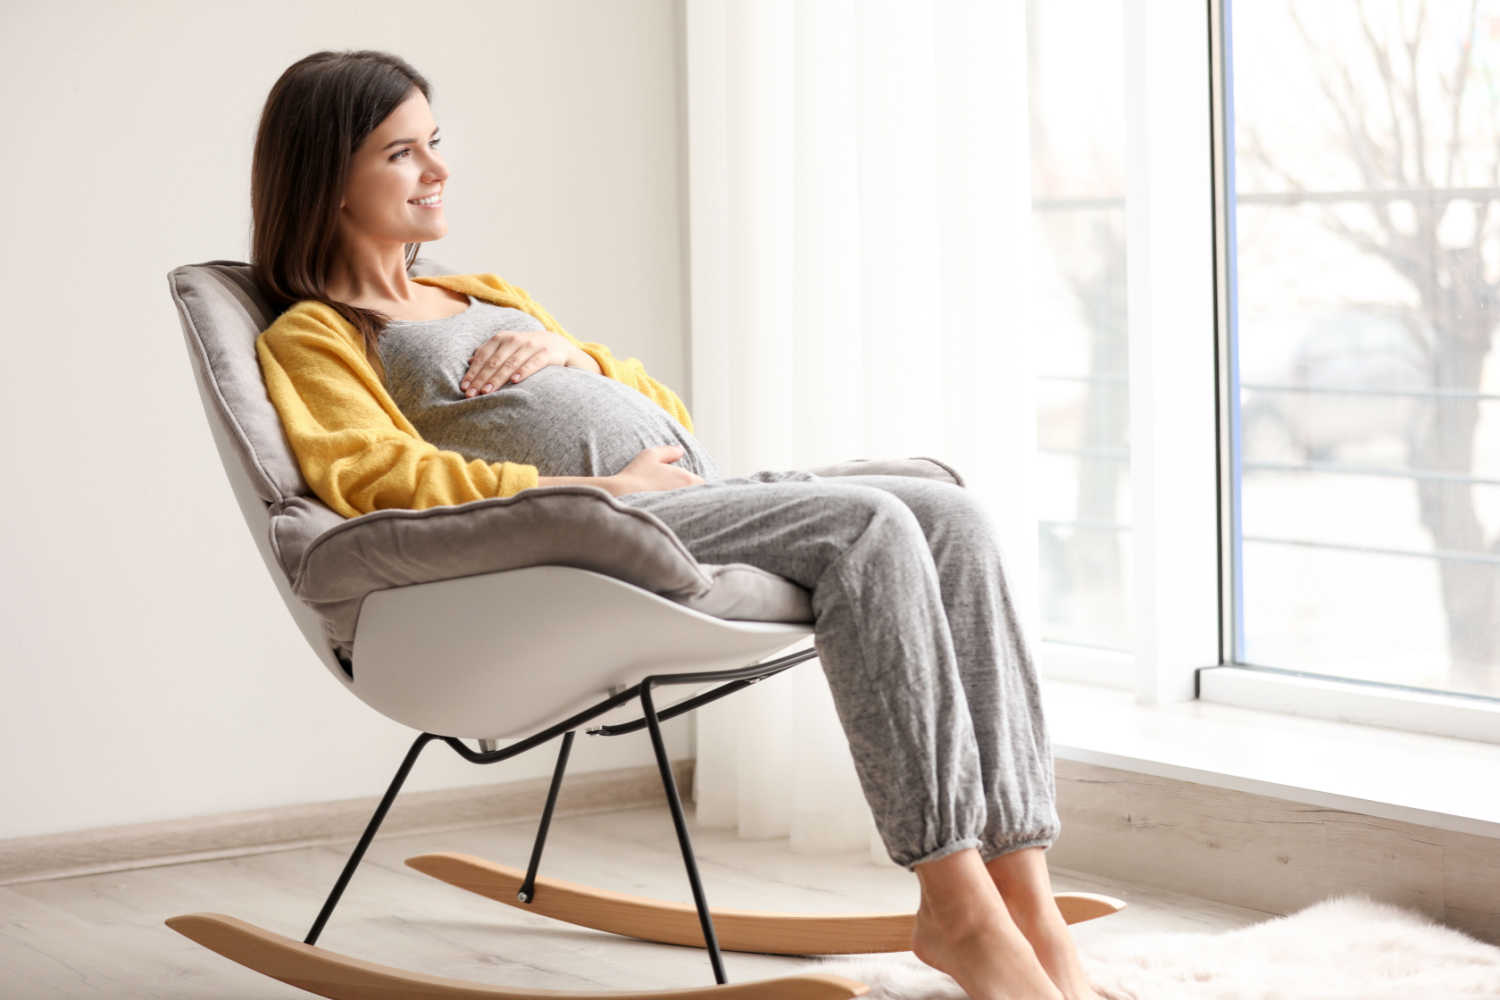 pregnant woman relaxing